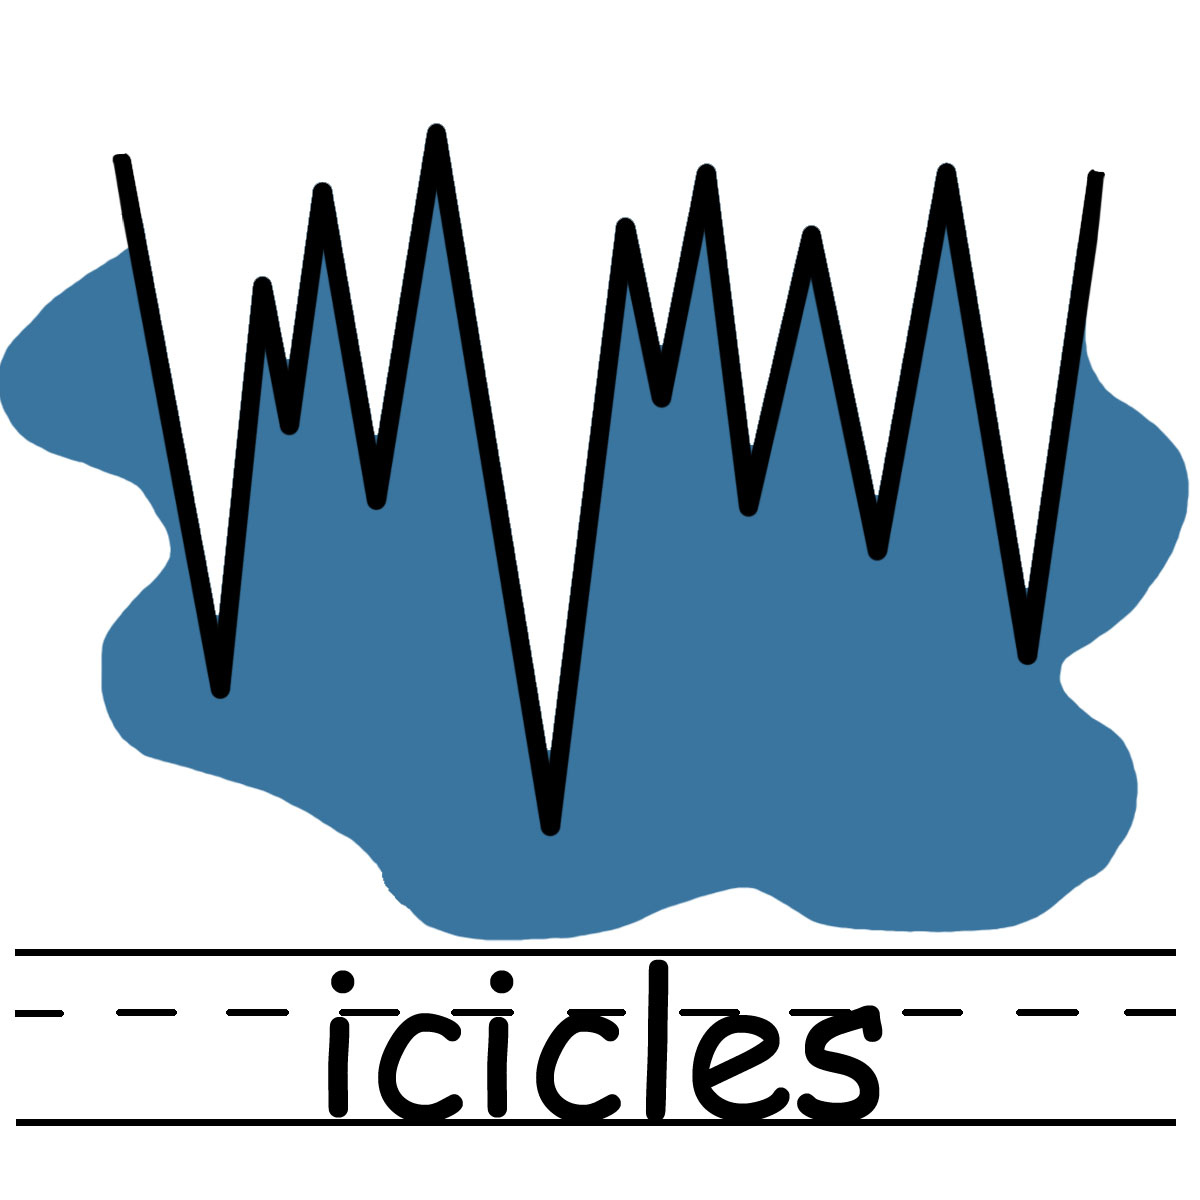 icicles clipart row